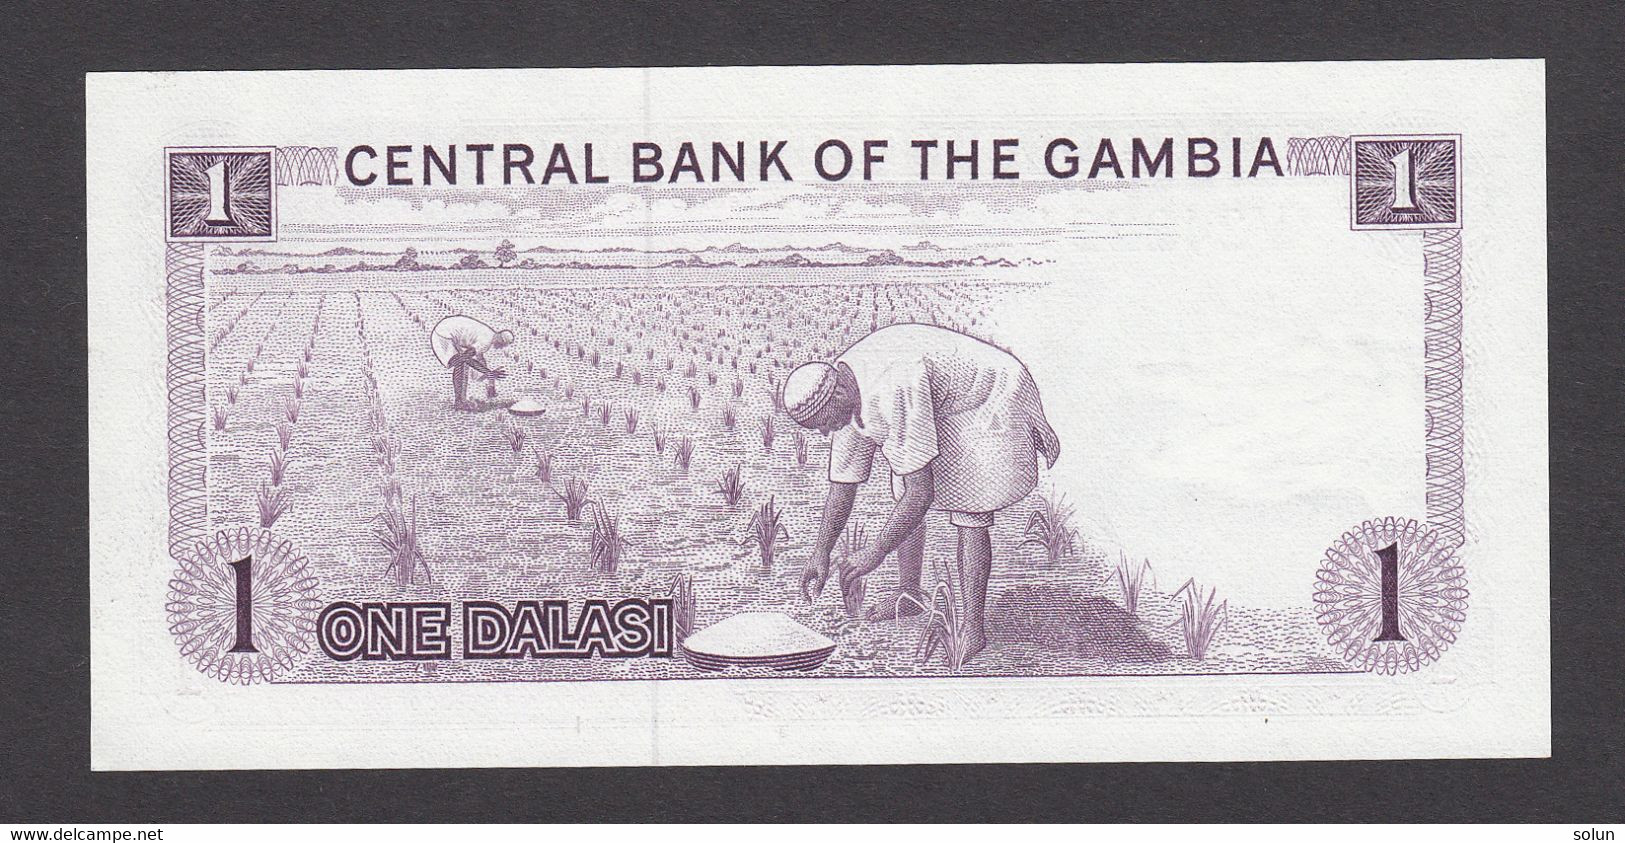 1 ONE DALASI  CENTRAL BANK OF THE GAMBIA  BANKNOTE - Gambia